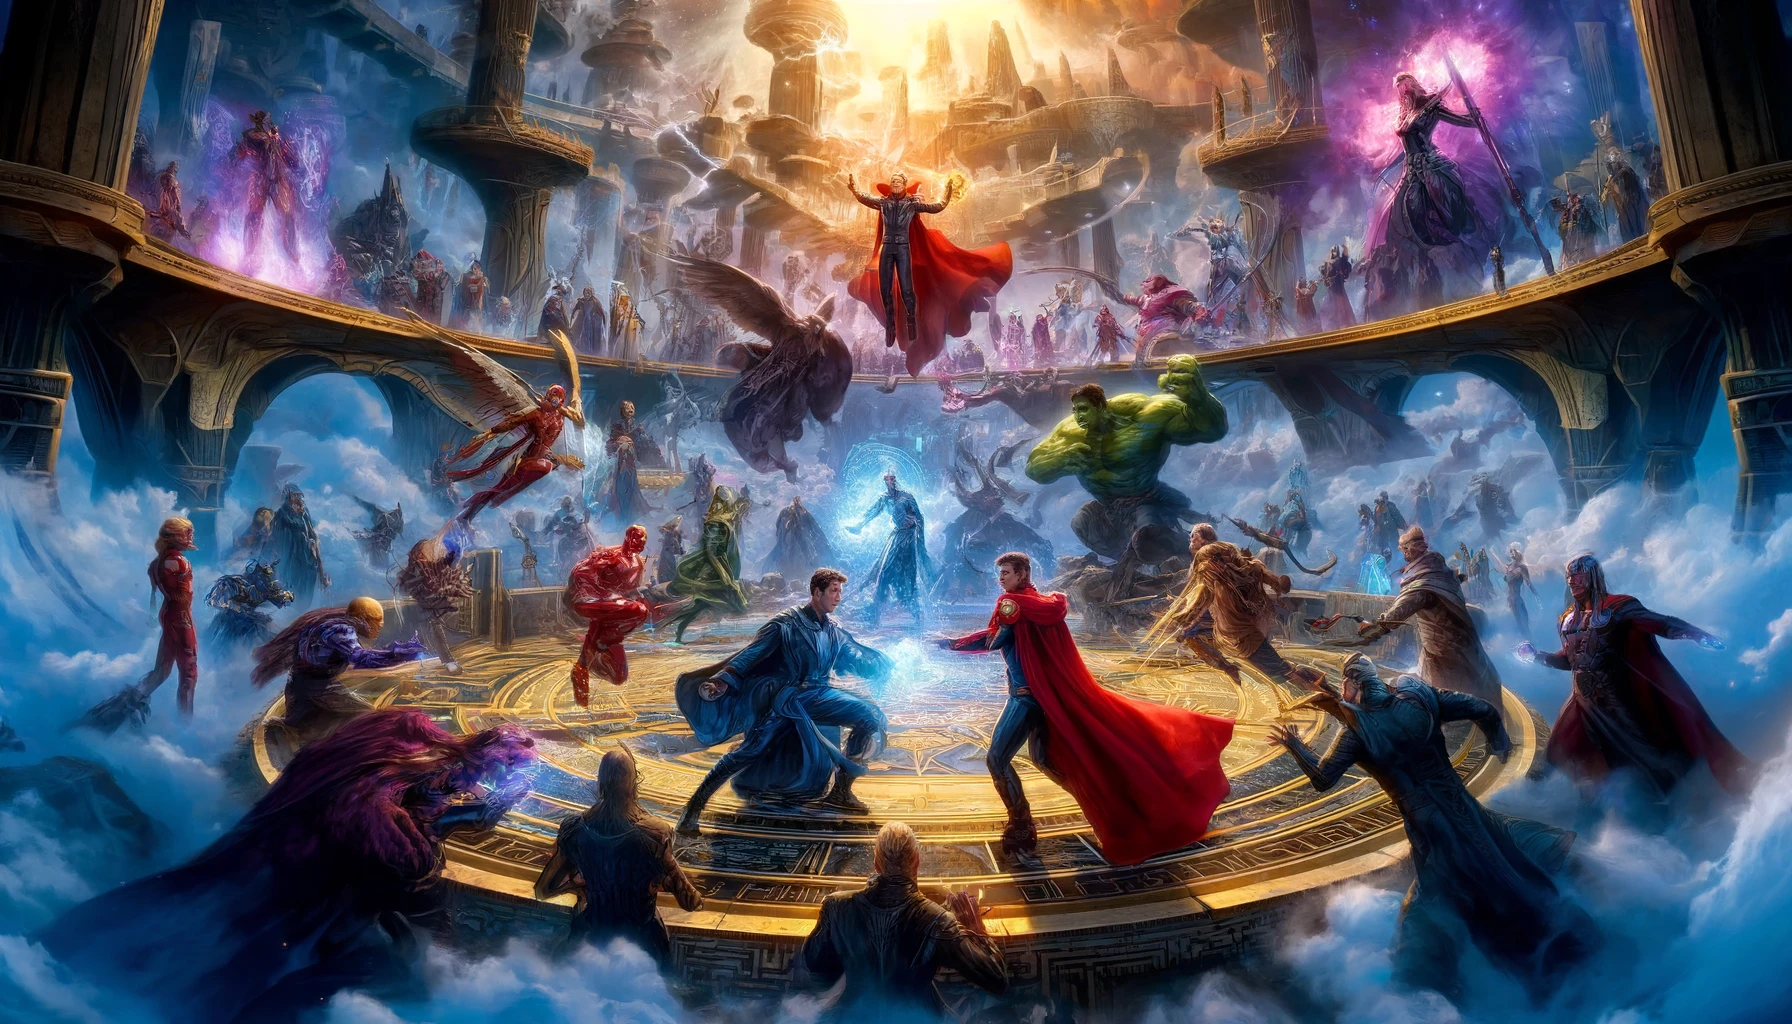 A high-color-depth, wide-format image inspired by Marvel Snap, showing characters from Pool 1 in a grand battle or strategic contest. The scene includes dynamic action poses, with characters utilizing their powers and abilities against a dramatic backdrop of ancient ruins and futuristic technology, creating a unique, otherworldly atmosphere.